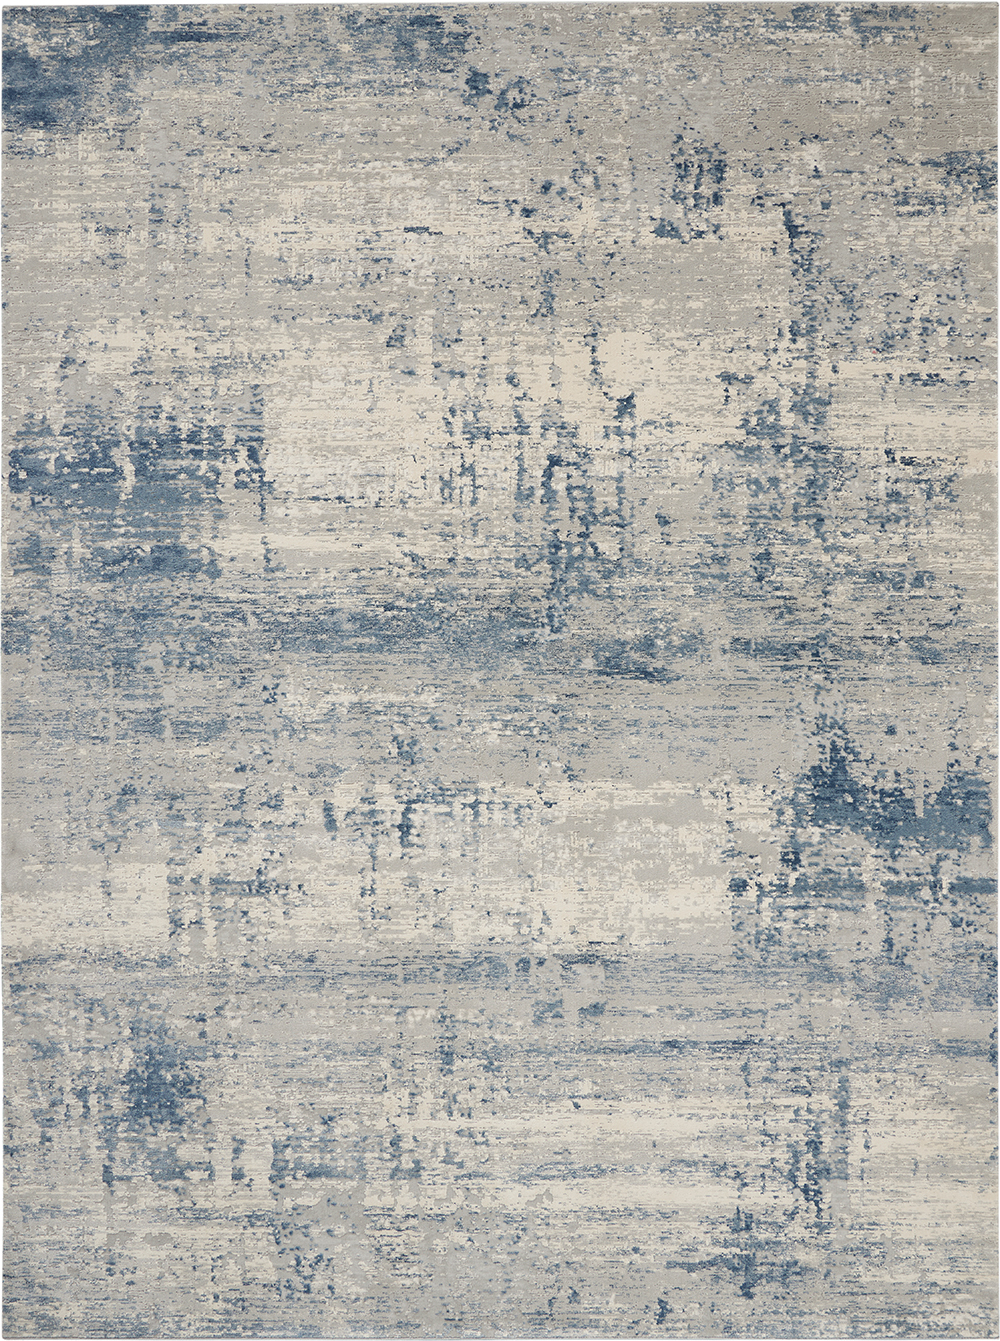 Nourison Rugs - Rustic Textures Rectanglular RUS10 Rug in Ivory / Blue - 3.2m x 2.4m